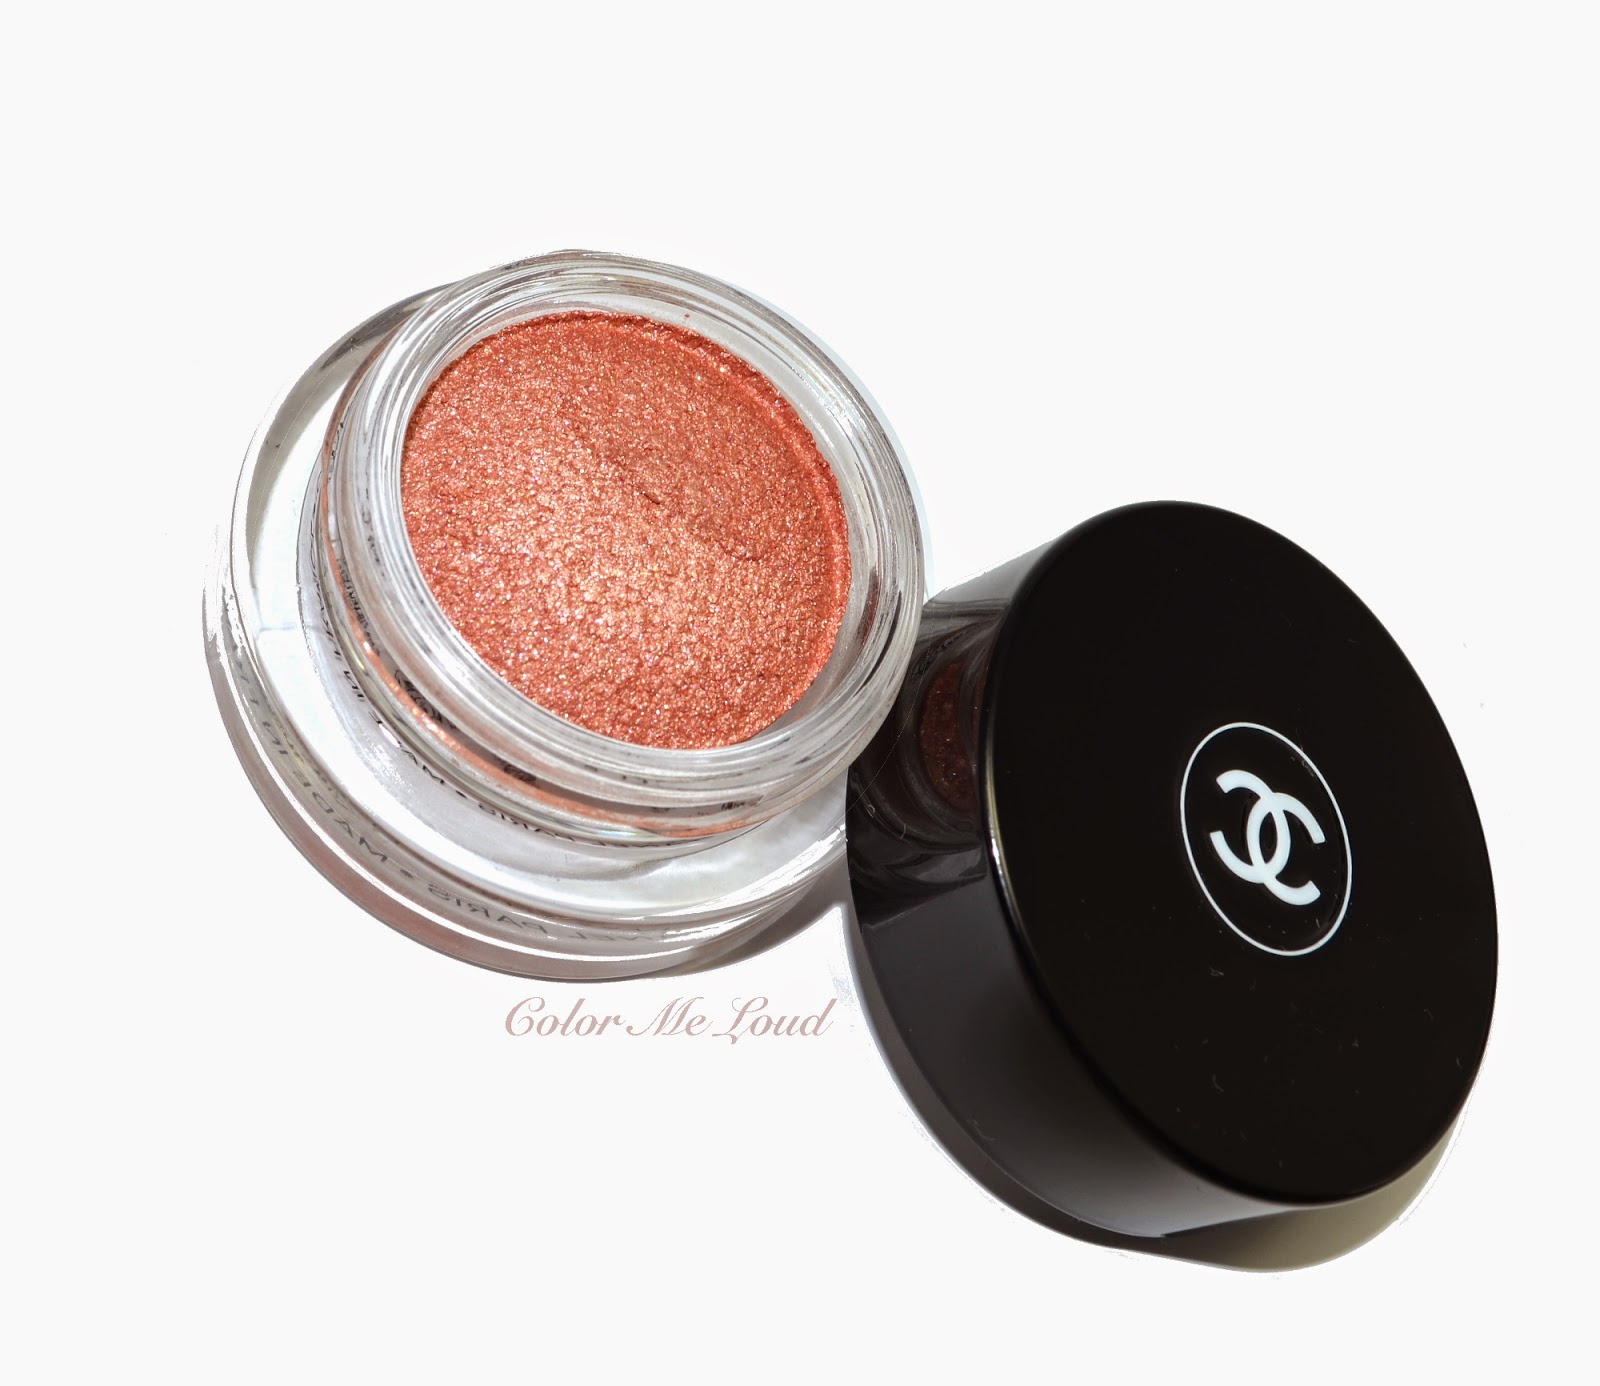 Chanel Illusion d'Ombre #847 Envol for Plumes Précieuses Holiday 2014 Collection, Review, Swatch and Comparison